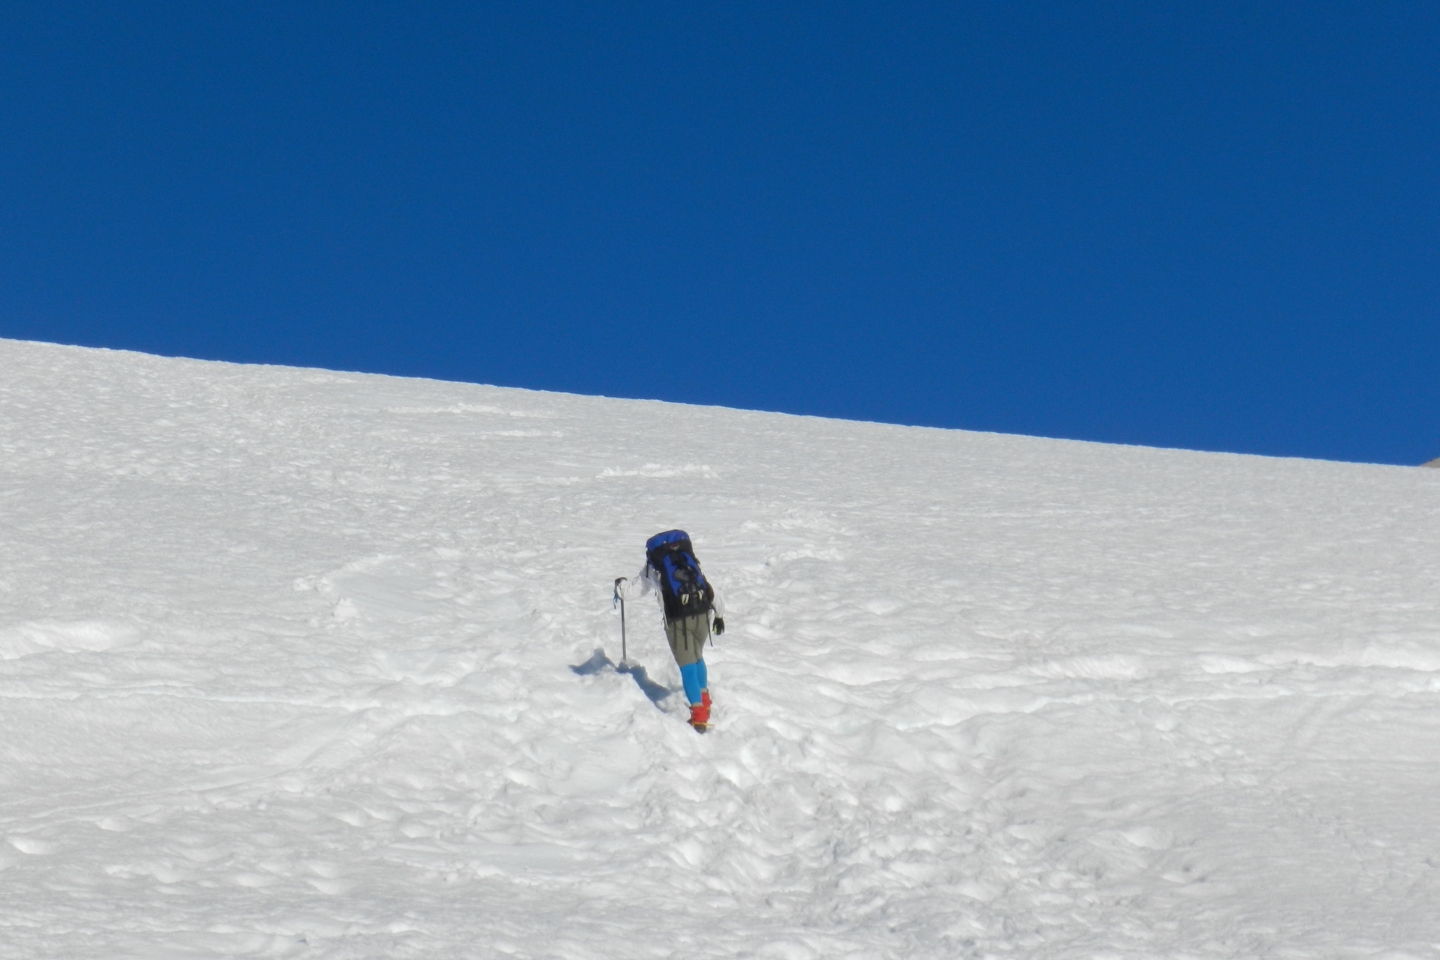 Lili stepping across a small crevasse on the upper Cool